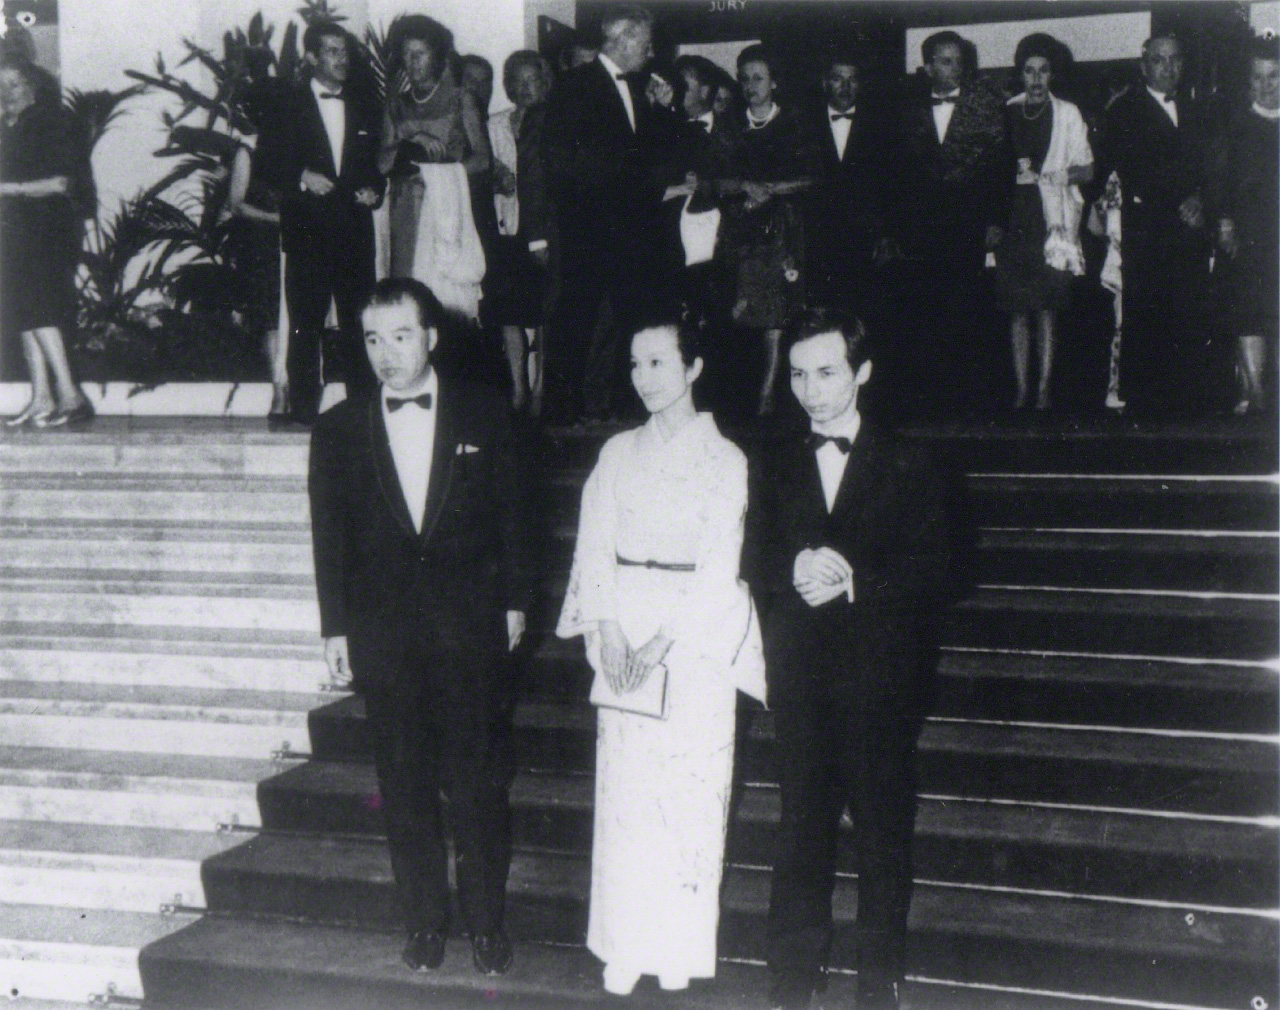 When Kwaidan won the Special Jury Prize at the Cannes International Film Festival in May 1965, Takemitsu (who wrote the music) attended the ceremony together with director Kobayashi Masaki (left) and actress Aratama Michiyo.